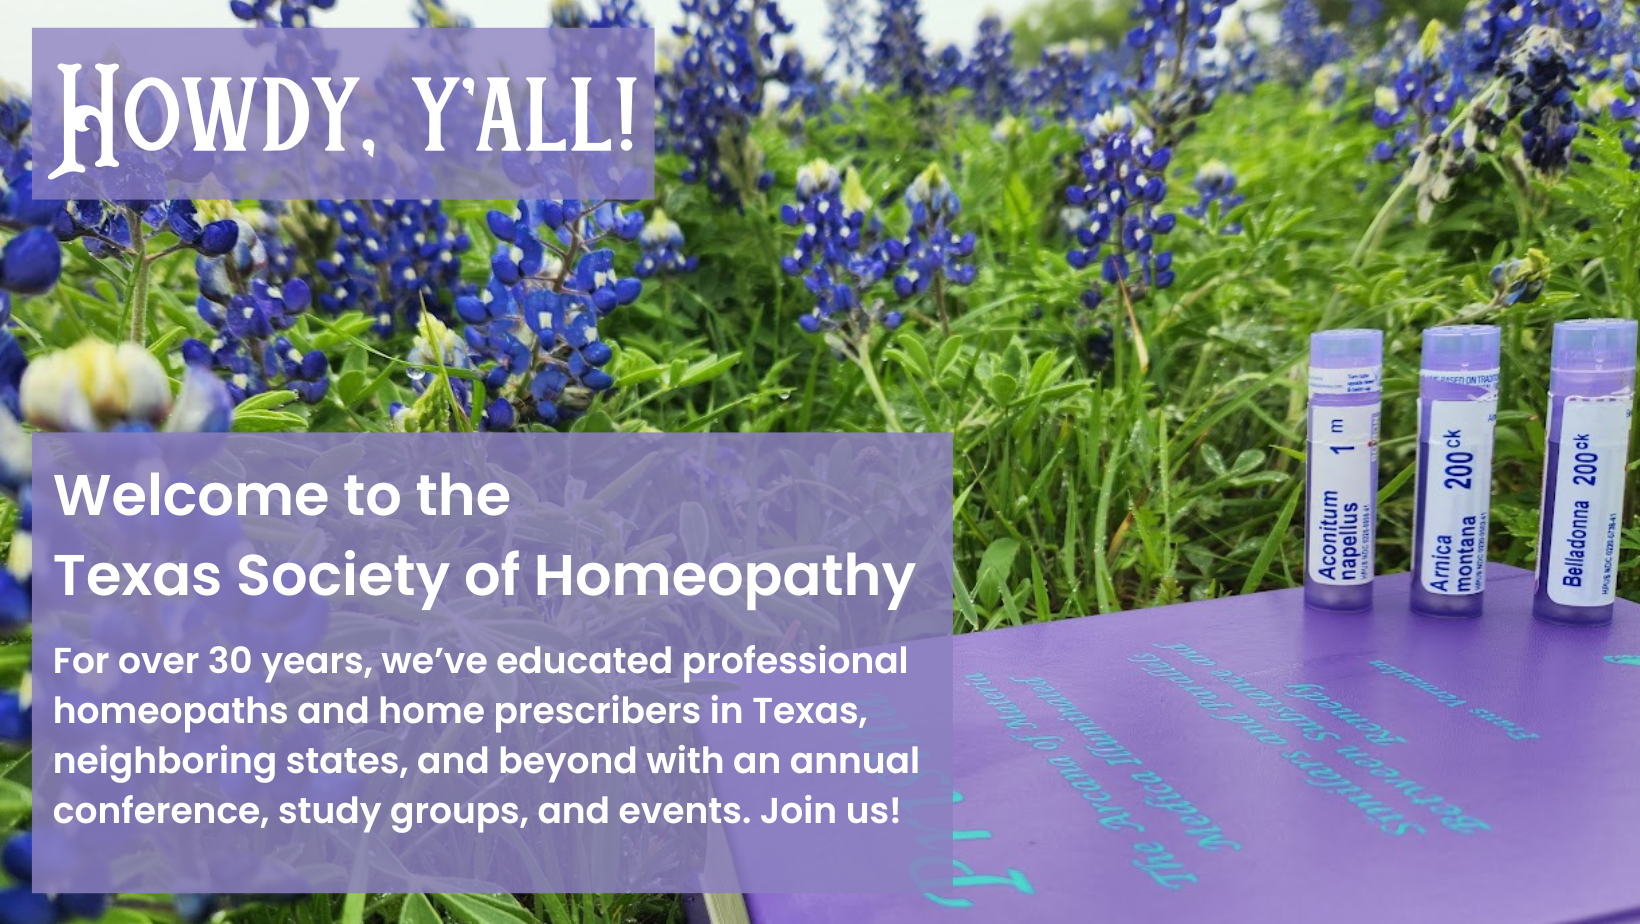 A homeopathic book and remedies in a field of bluebonnets.